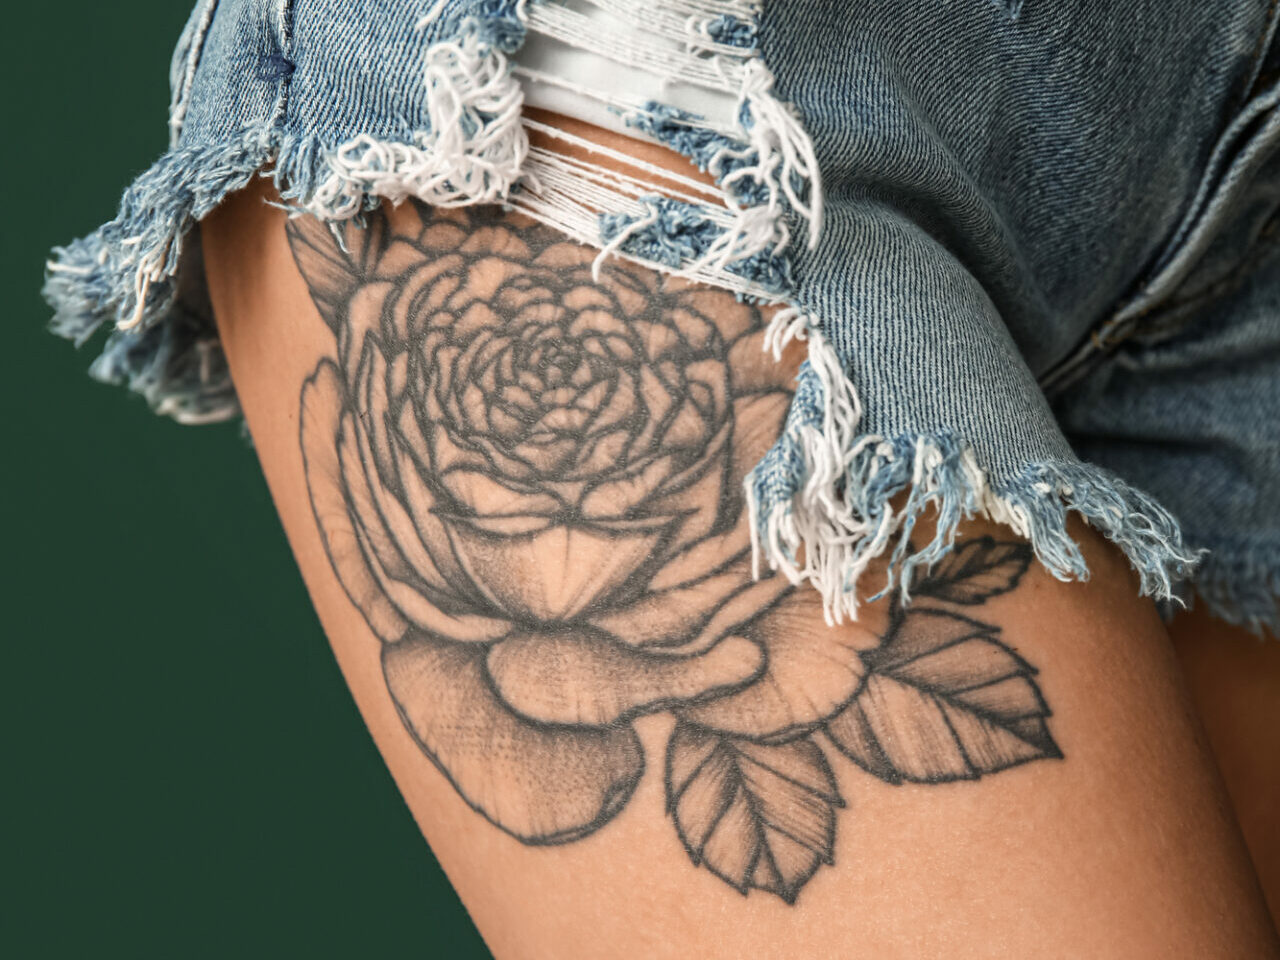 a big upper thigh rose tattoo peaking out from cut off jeans